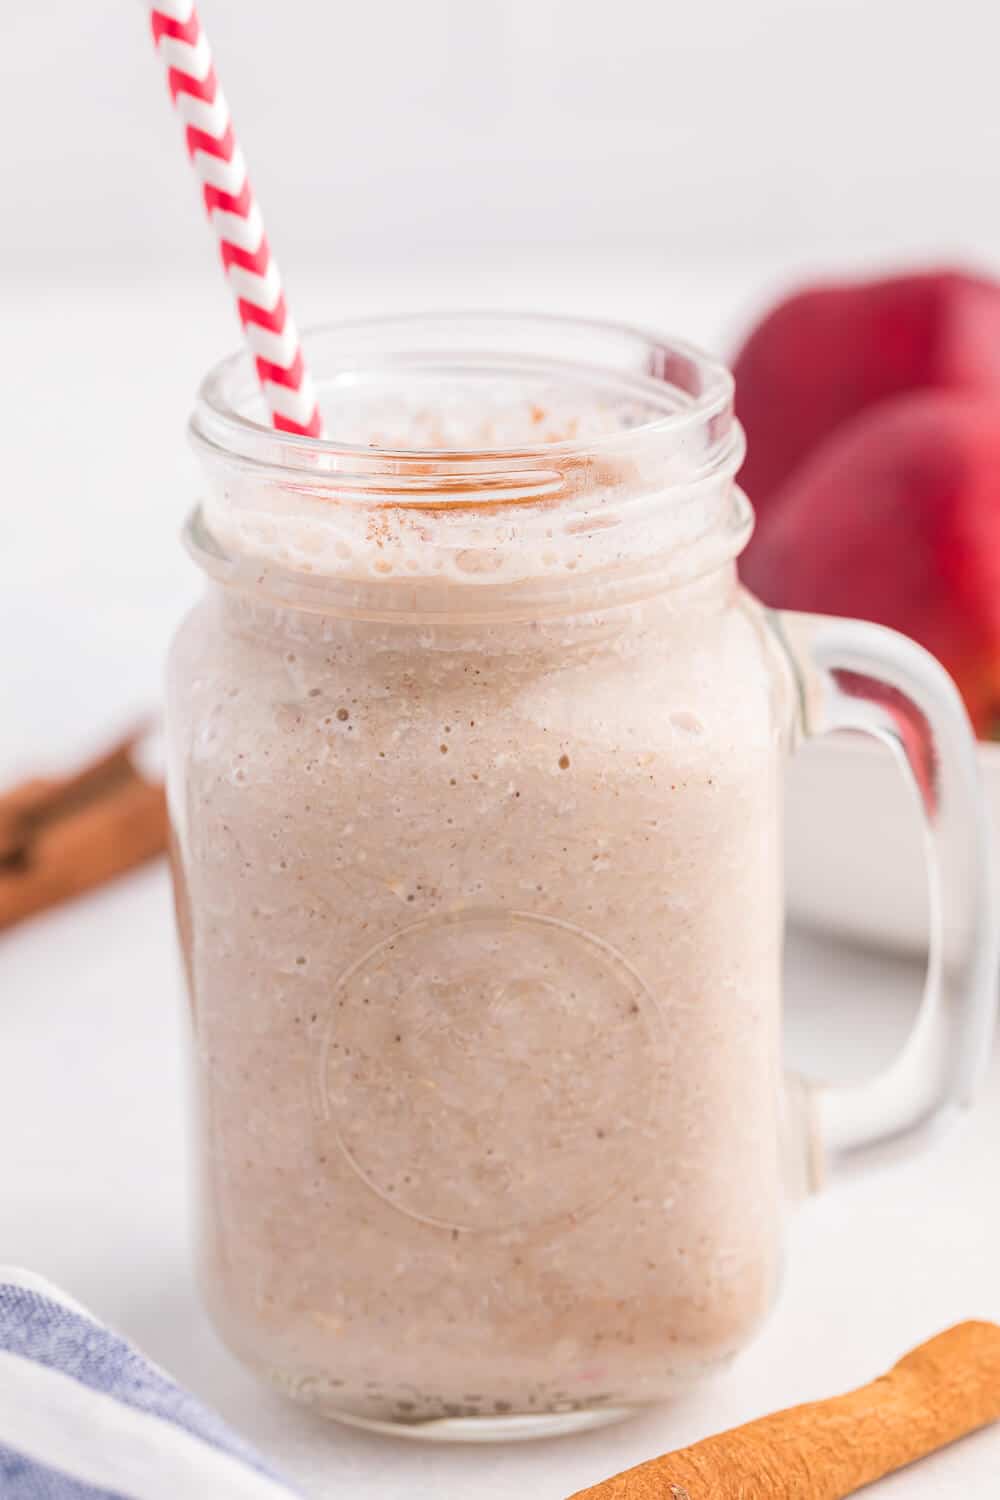 Apple Spice Smoothie - The secret ingredient in this thick and delicious smoothie is oats! A great way to add some fibre to your day, and it tastes amazing.